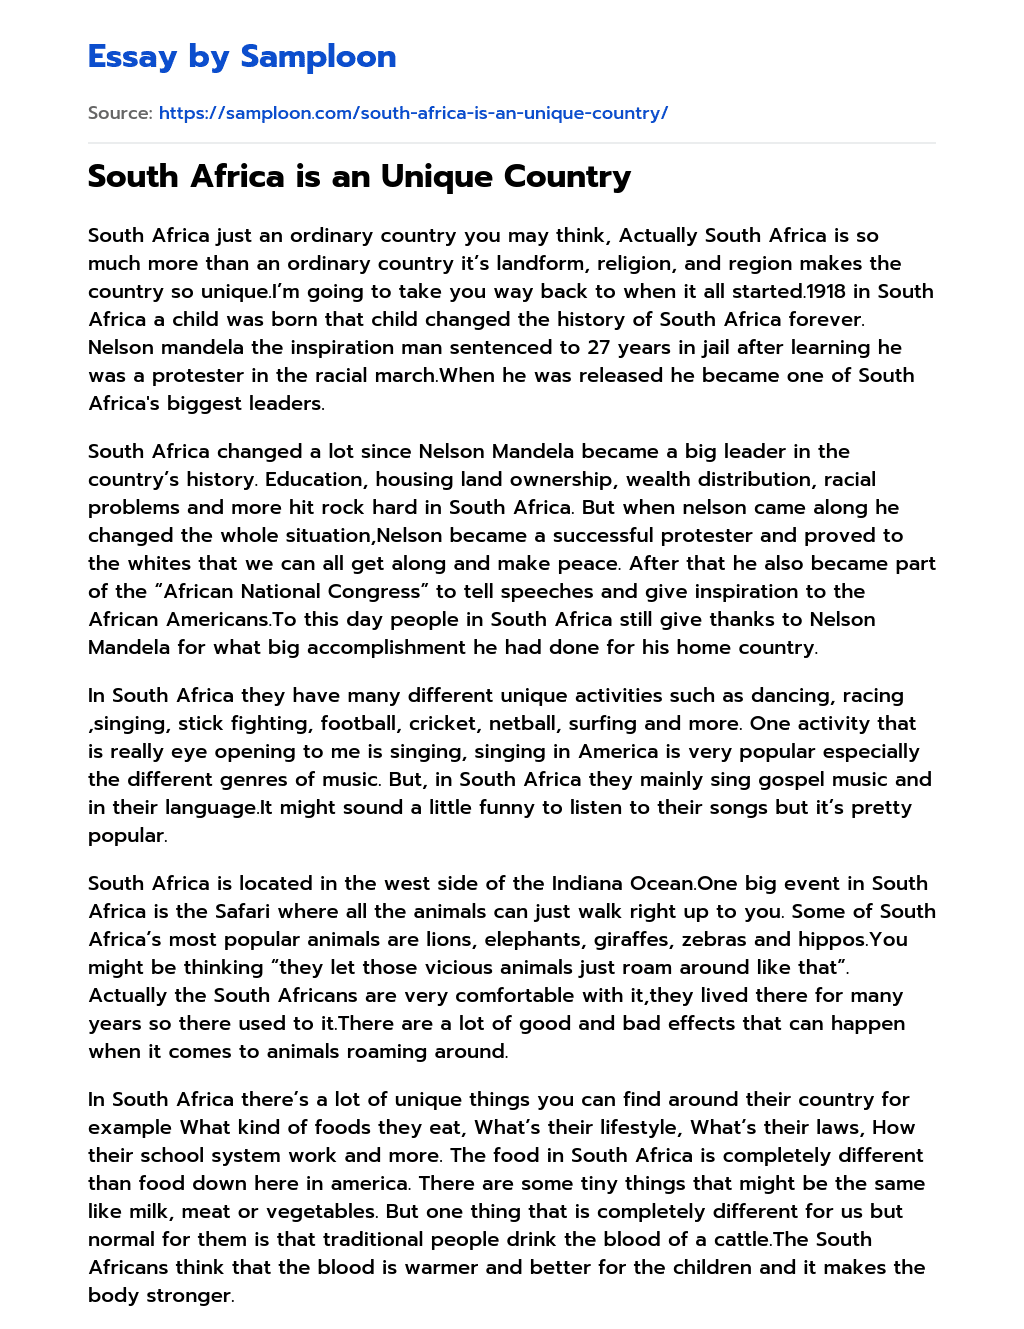 South Africa is an Unique Country Free Essay Sample on 